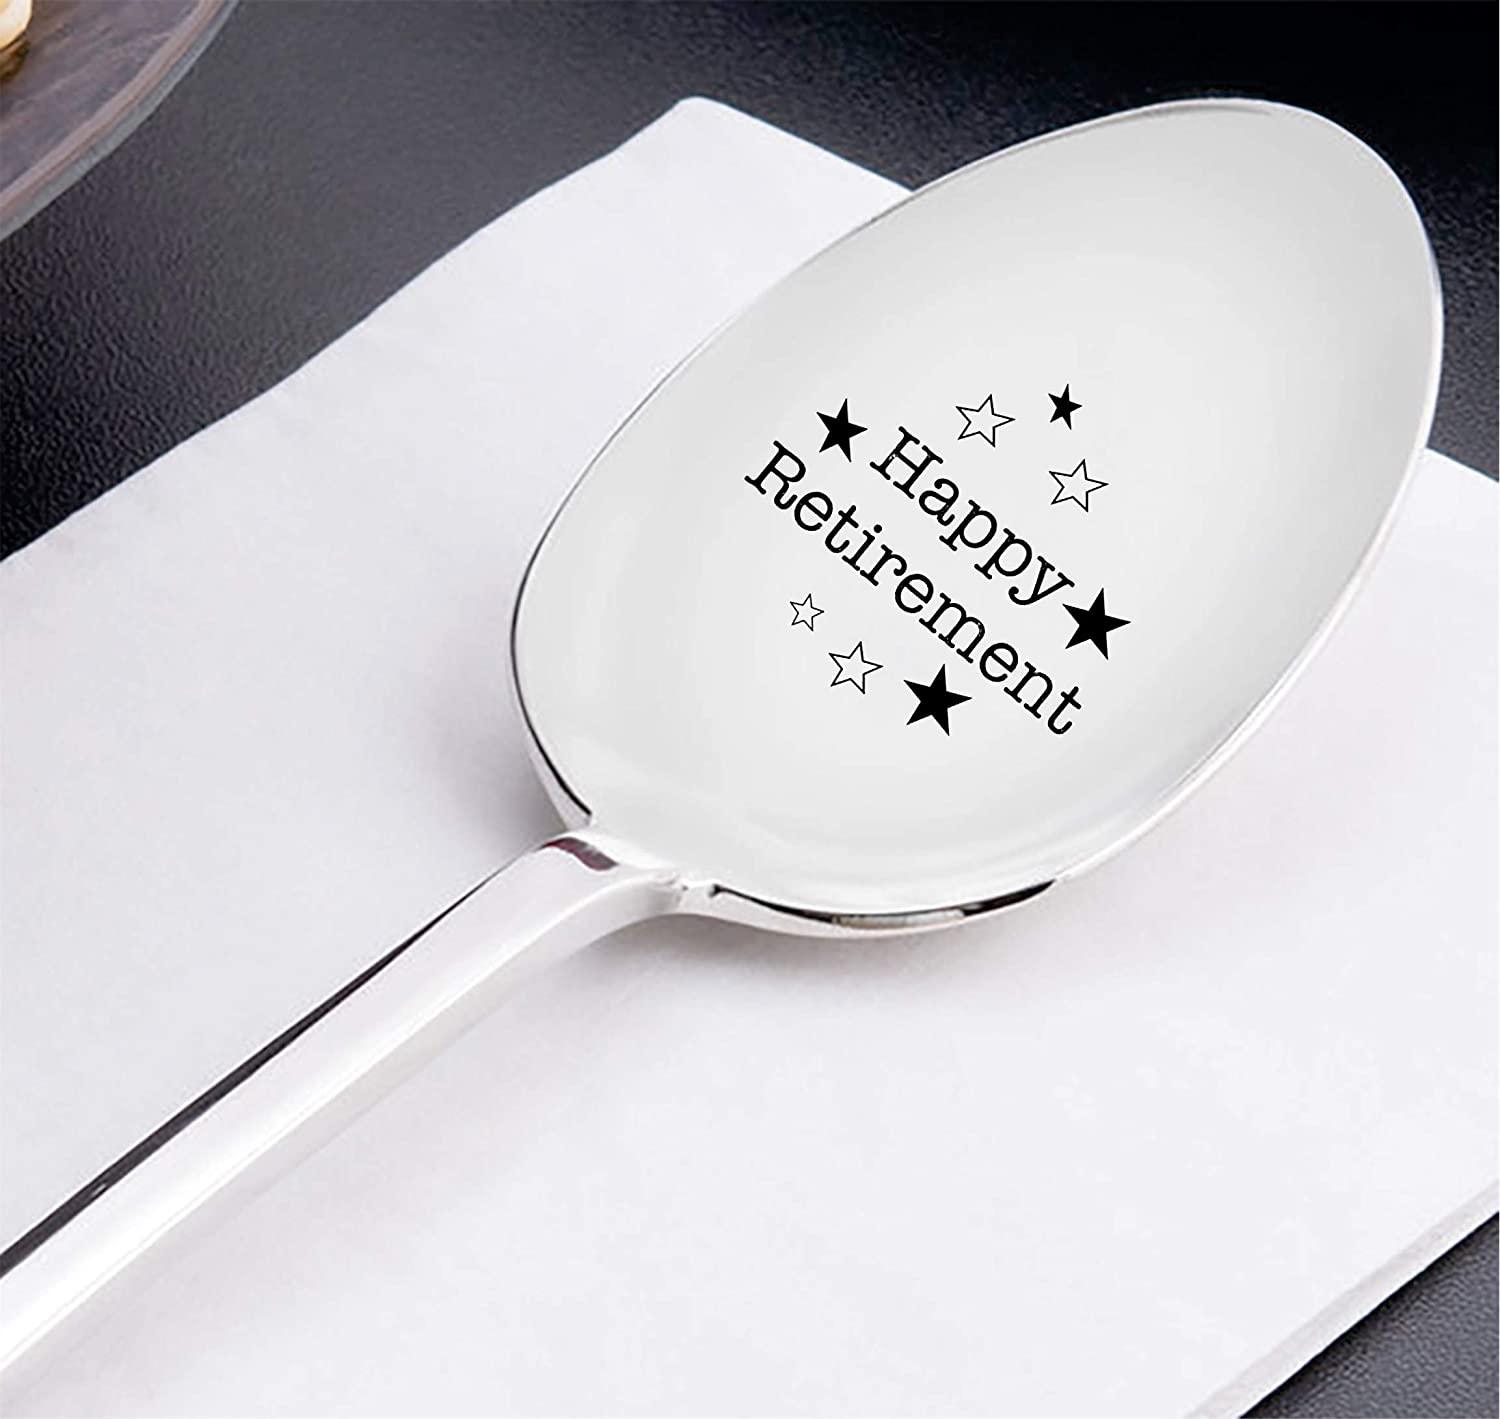 Happy Retirement - Happy retirement gifts - retire happy - retirement spoon  - Retirement Gift Ideas - Retirement gifts for men - retirement gifts for  women - Gift for coworker - retirement party gifts – BOSTON CREATIVE COMPANY